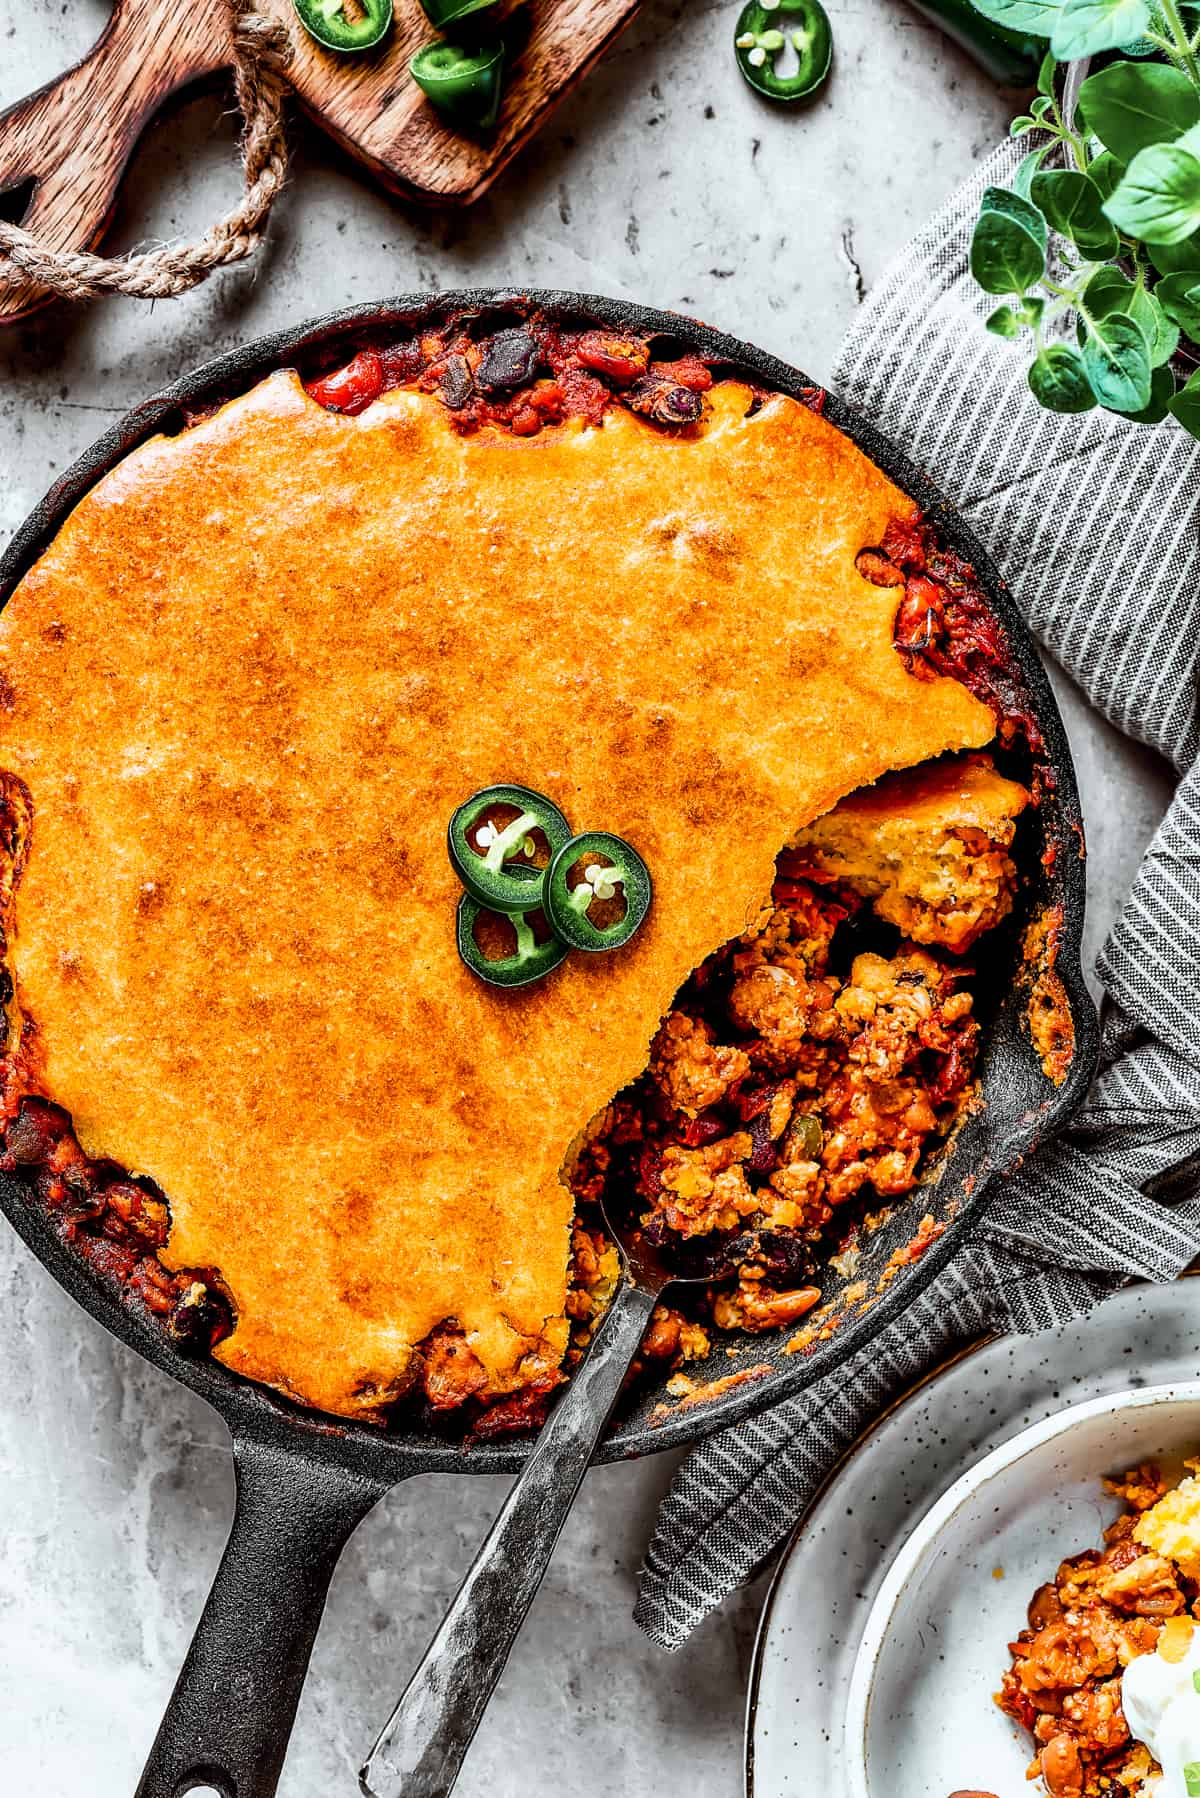 Overhead shot of a cast iron skillet with homemade Chili cornbread casserole and a serving removed with a spoon.